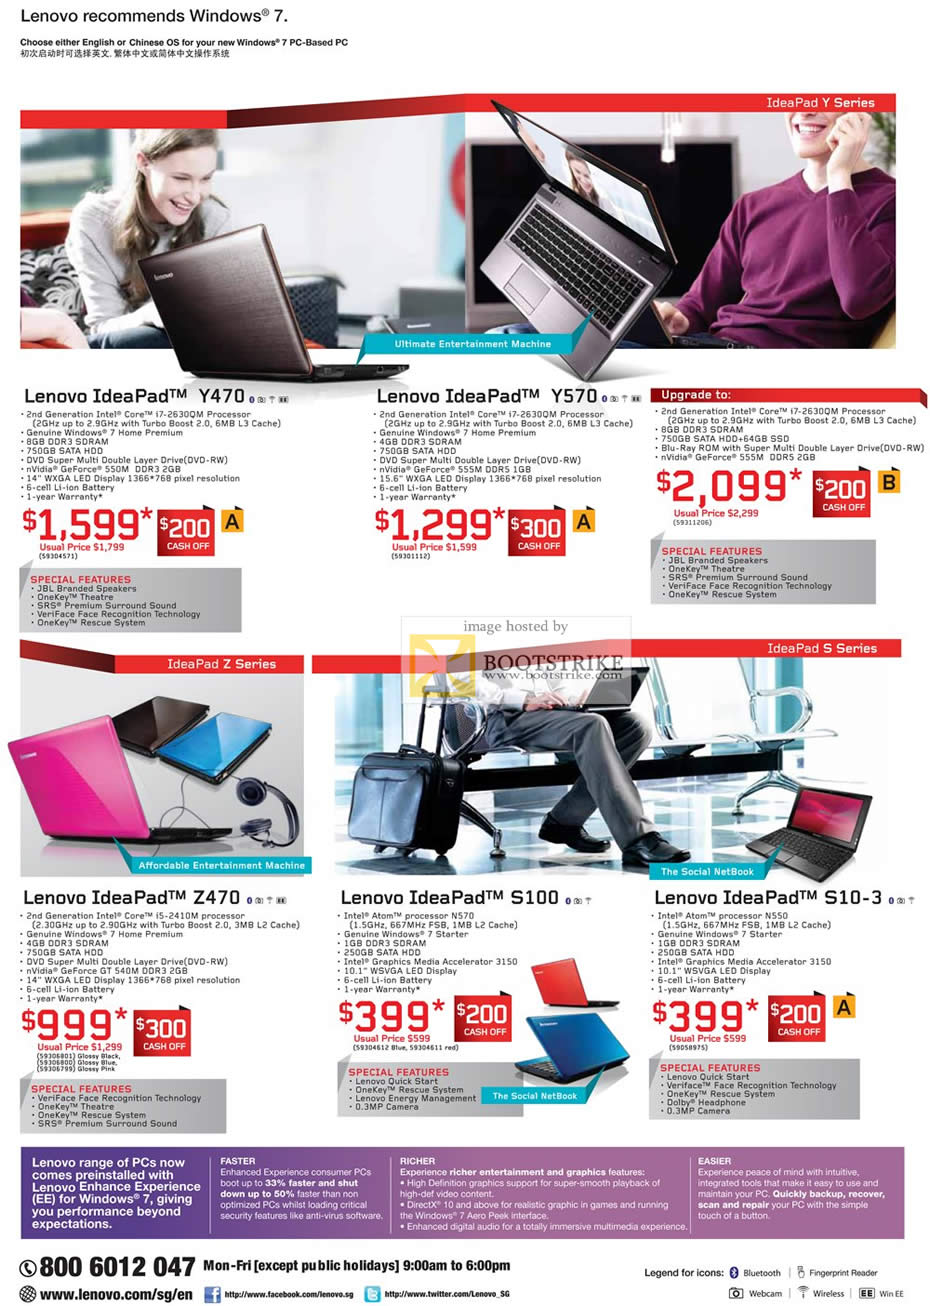 COMEX 2011 price list image brochure of Lenovo Notebooks IdeaPad Y470 Y570 Z470 S100 Netbook S10-3